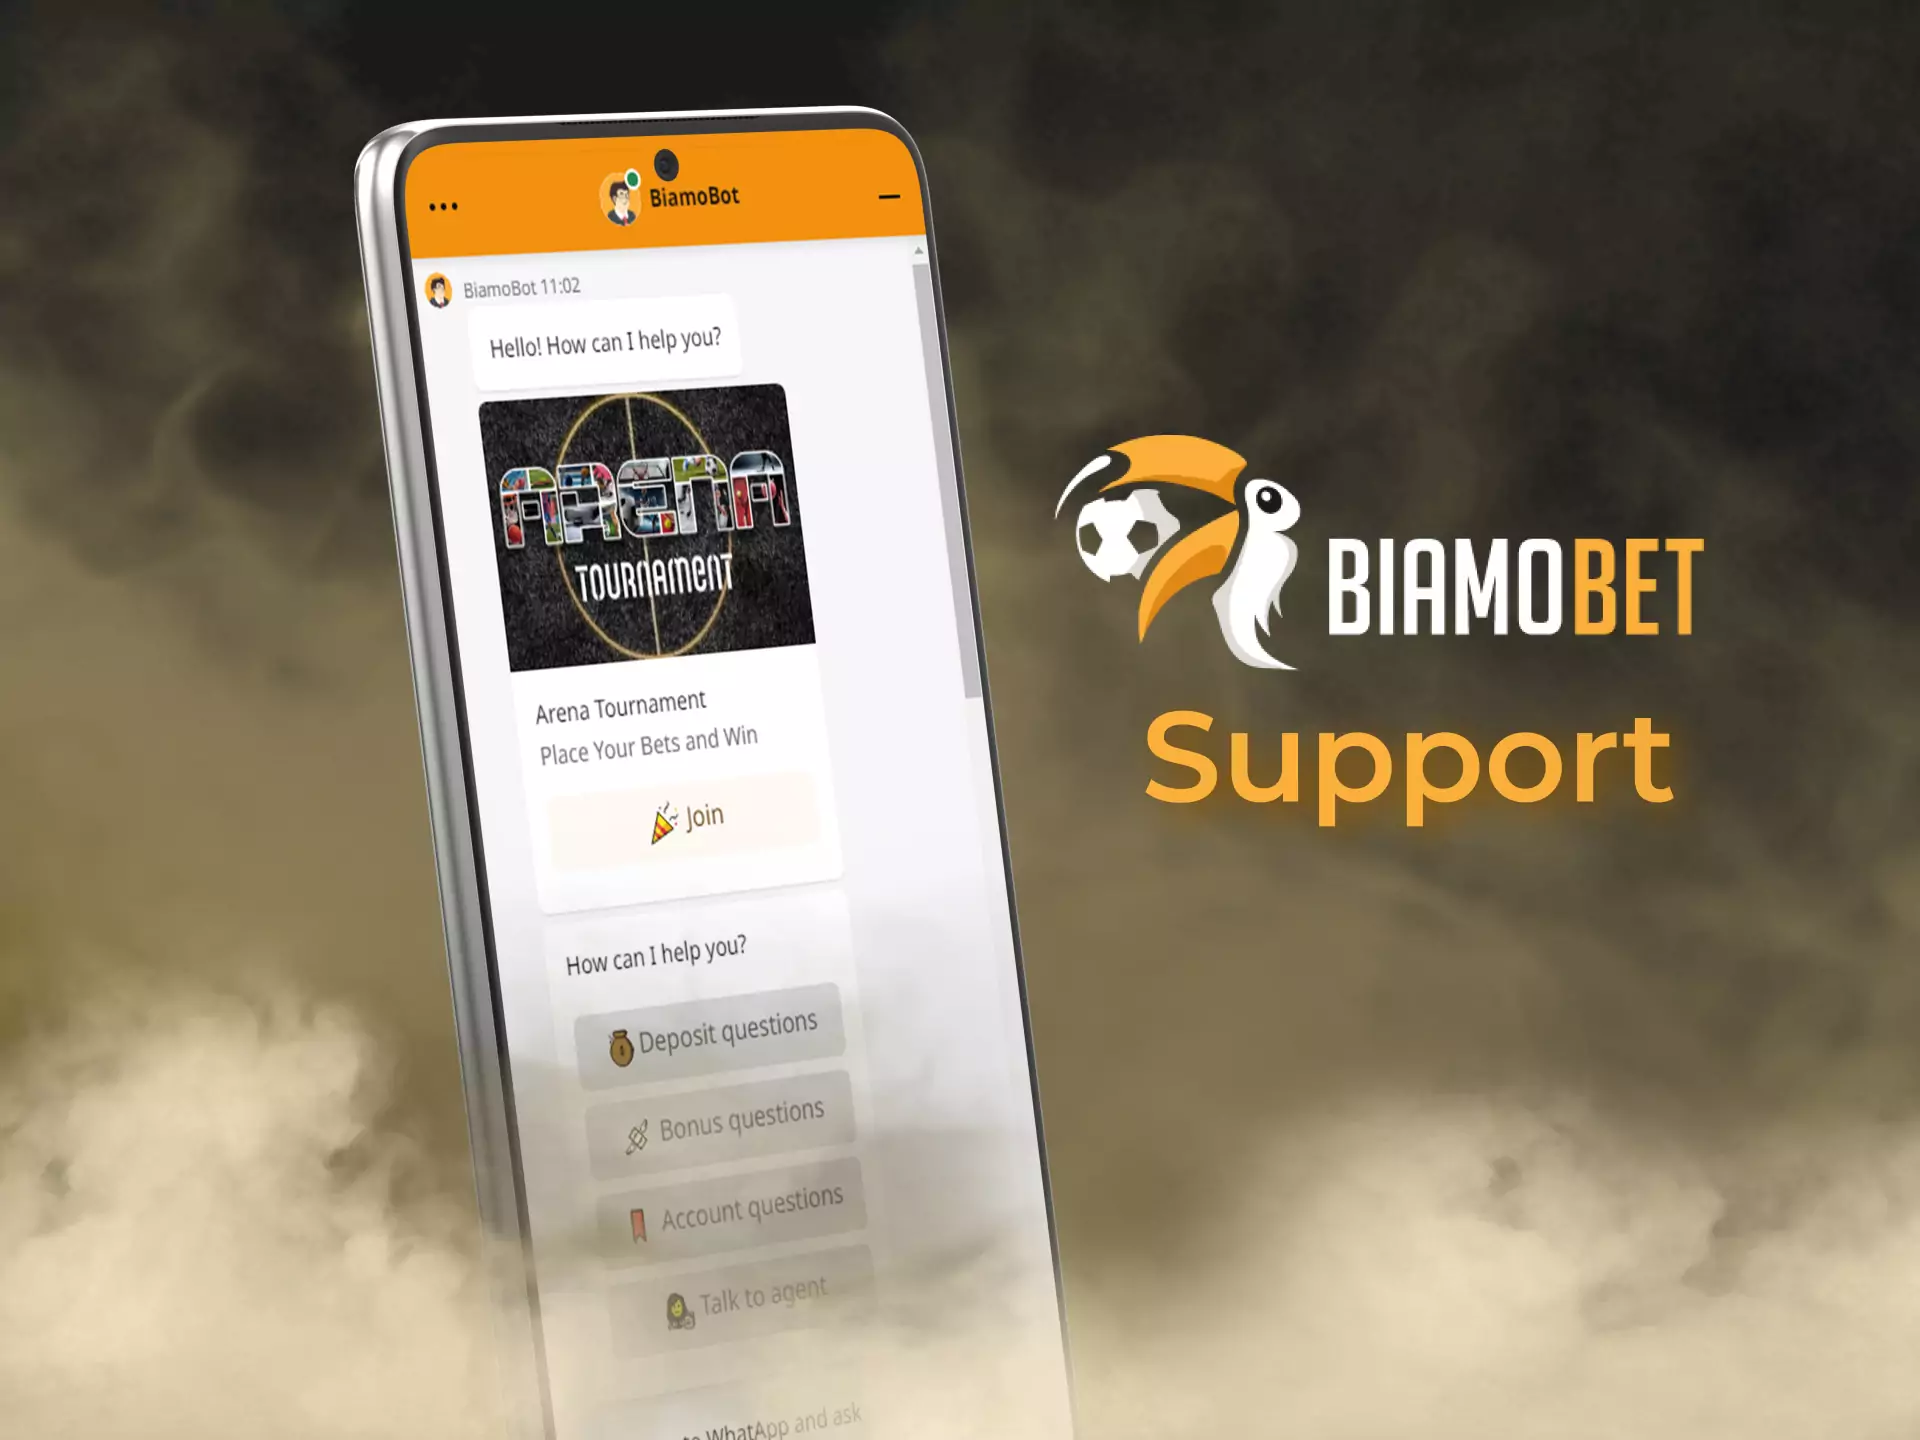 If you have problems with betting on the platform, ask chat support in the Biamobet app.